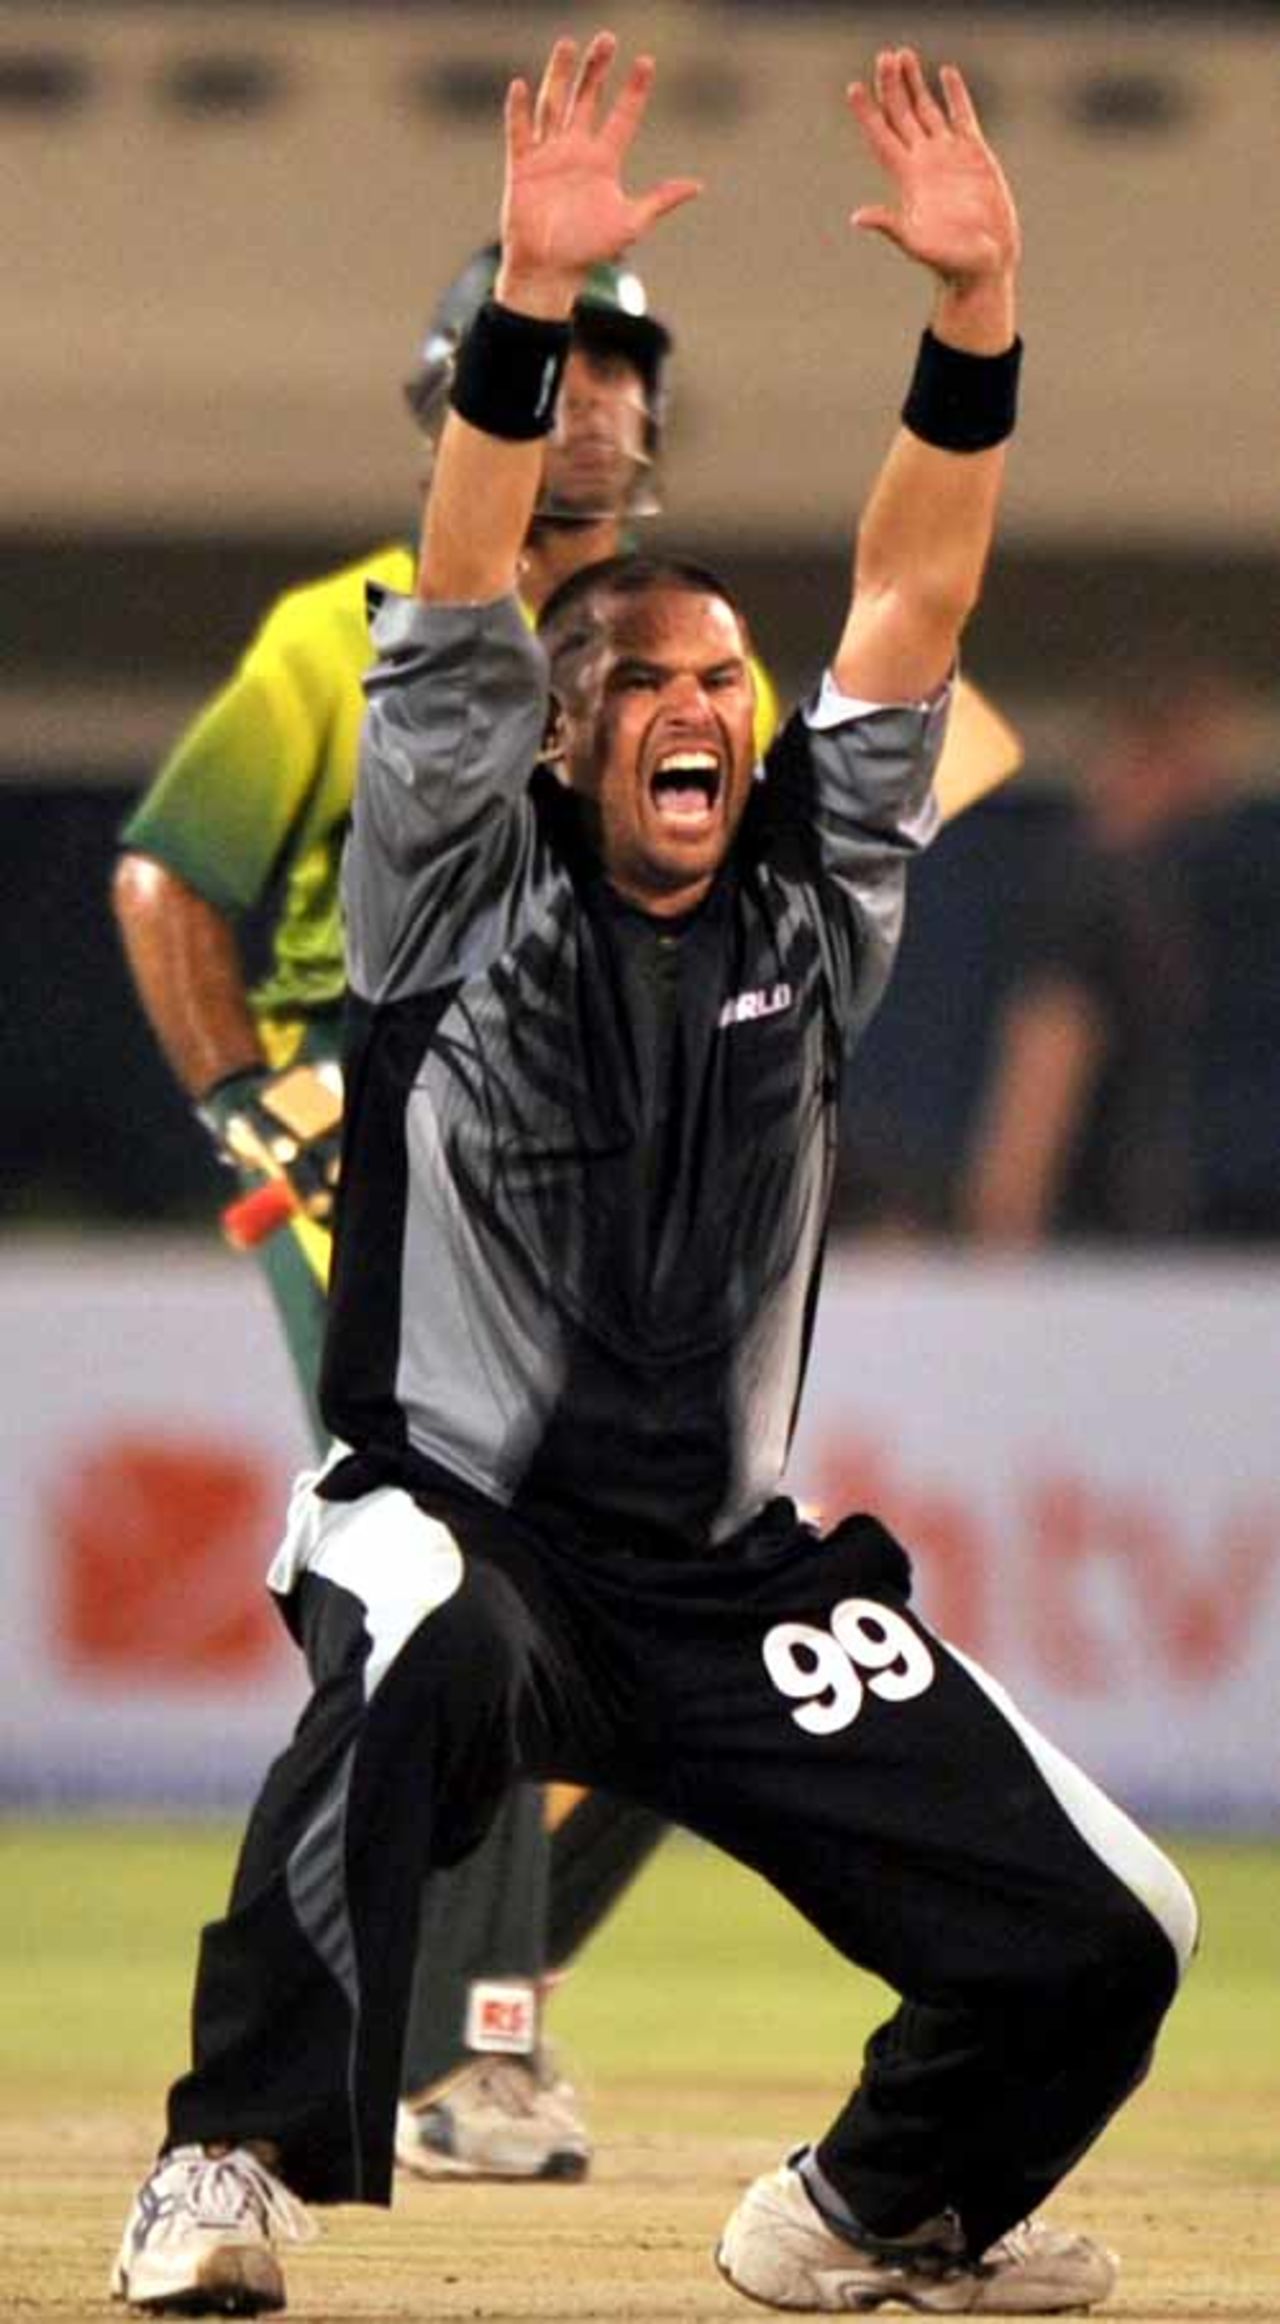 Andrew Hall lets out a loud appeal, Pakistan XI v World XI, Indian Cricket League, Hyderabad, April 14, 2008